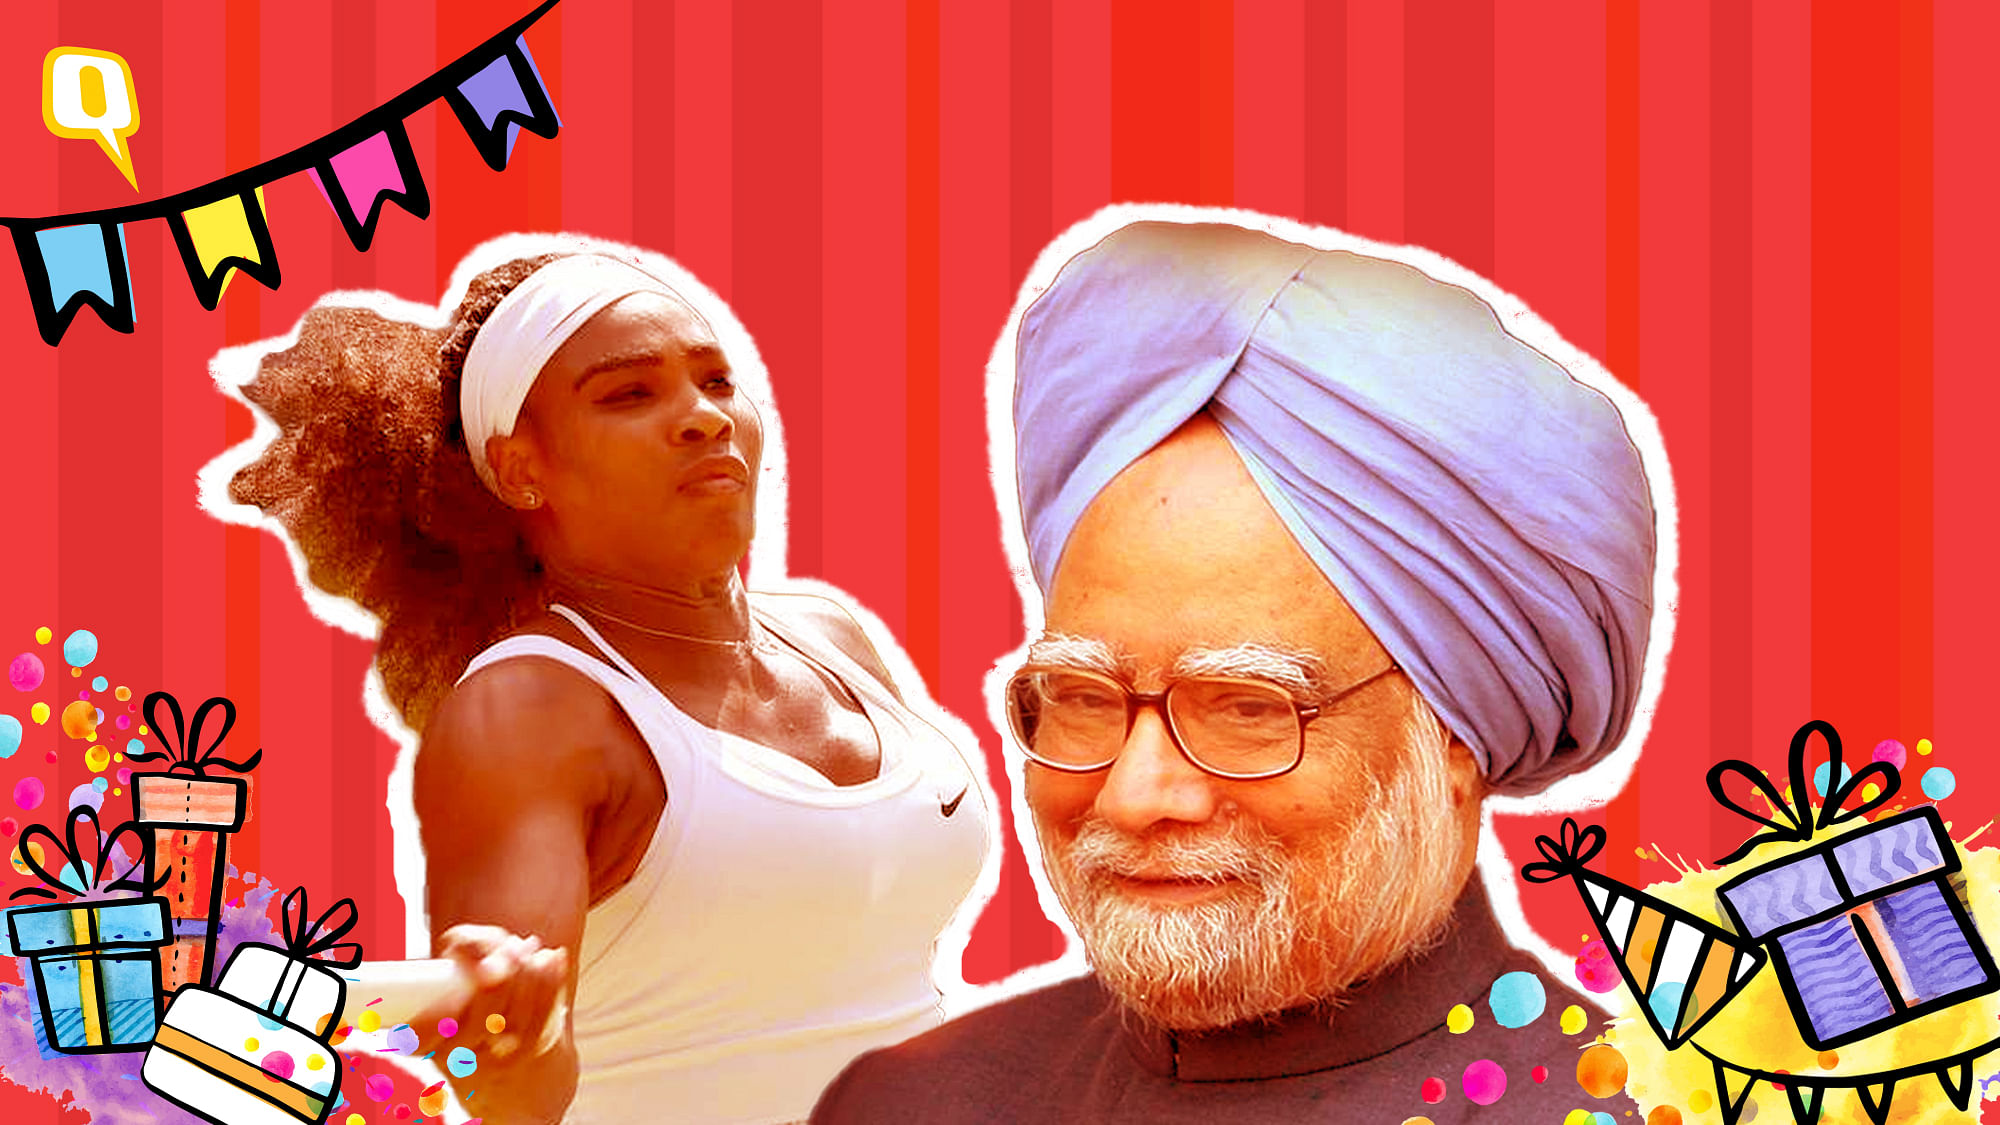 Among those you share your birthday with are Serena Williams and Manmahon Singh.